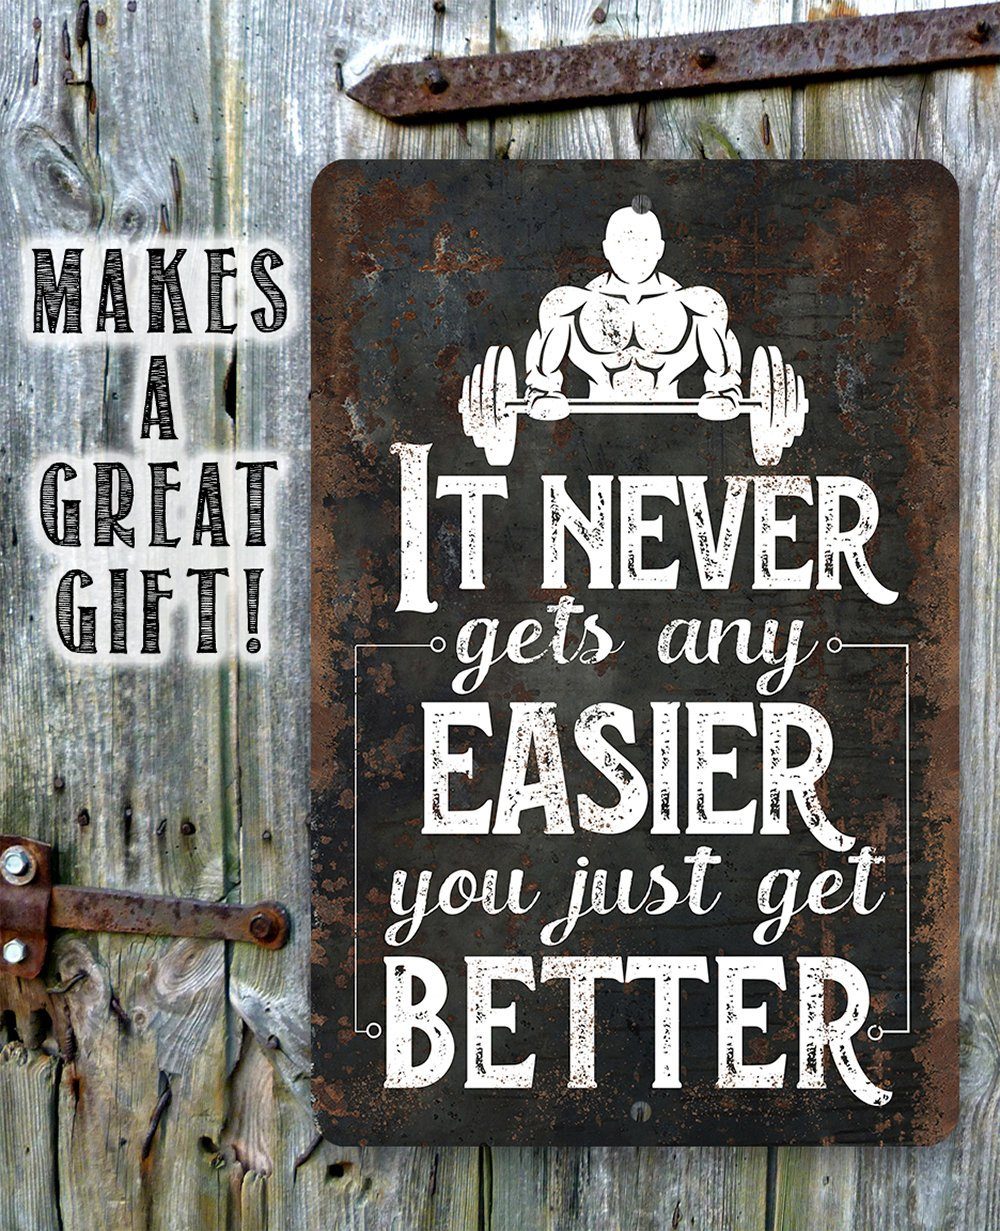 It Never Gets Any Easier - Metal Sign | Lone Star Art.